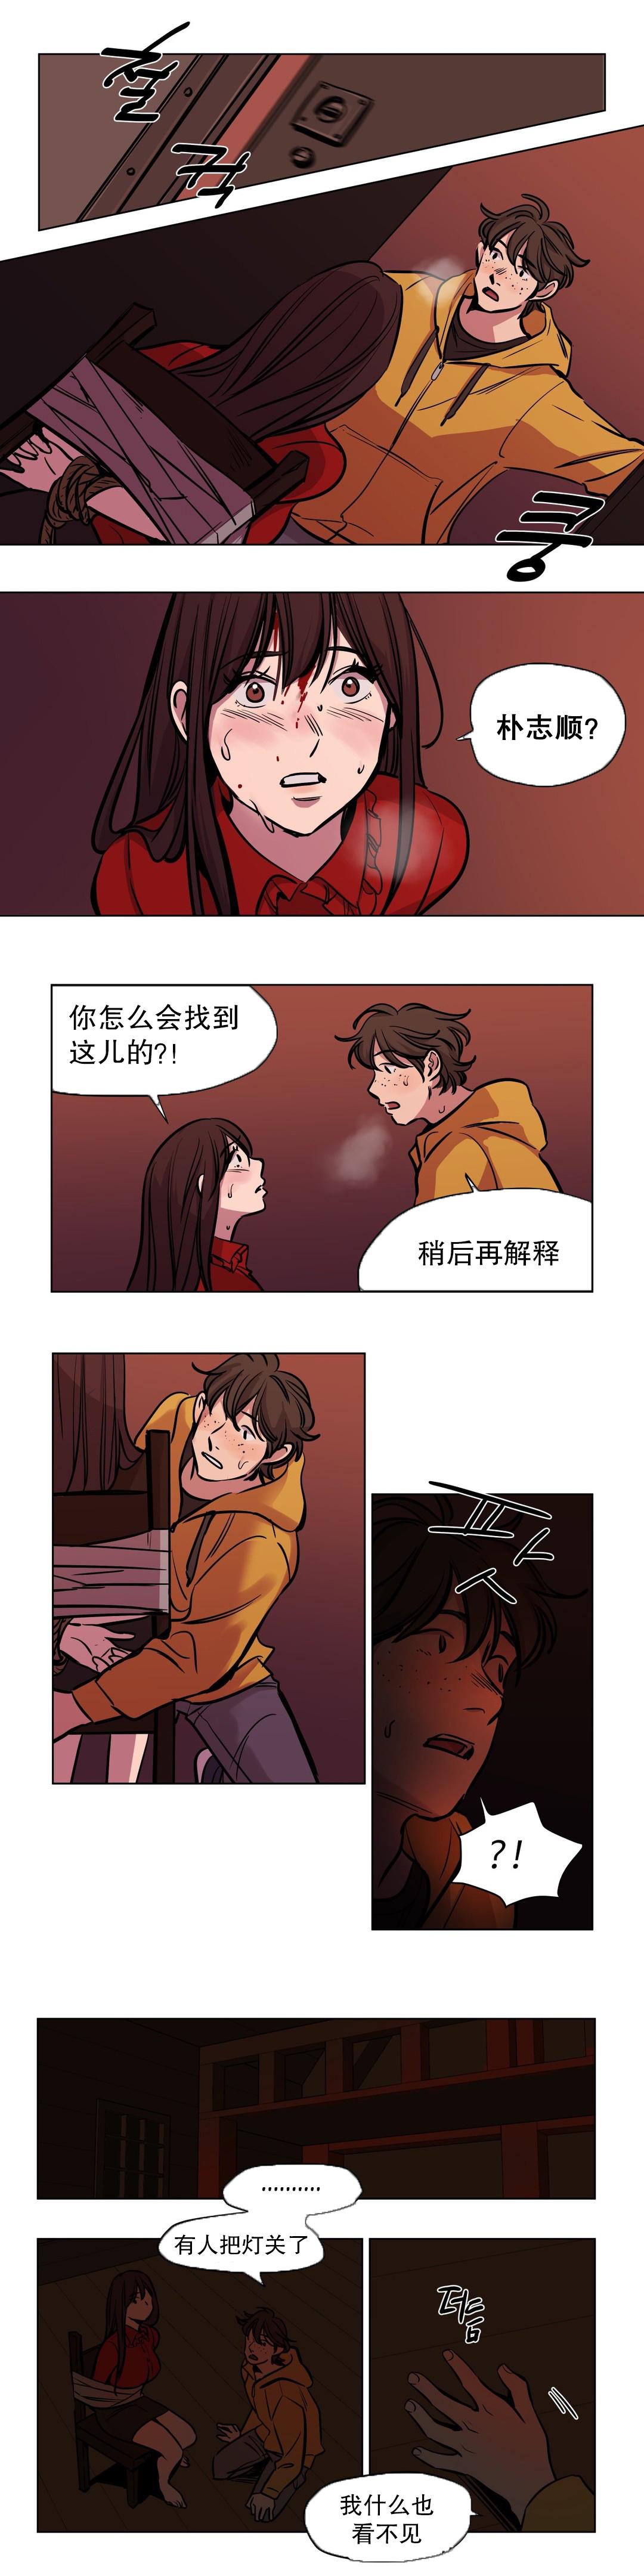 [Ramjak] 赎罪营(Atonement Camp) Ch.50-52 (Chinese) 21